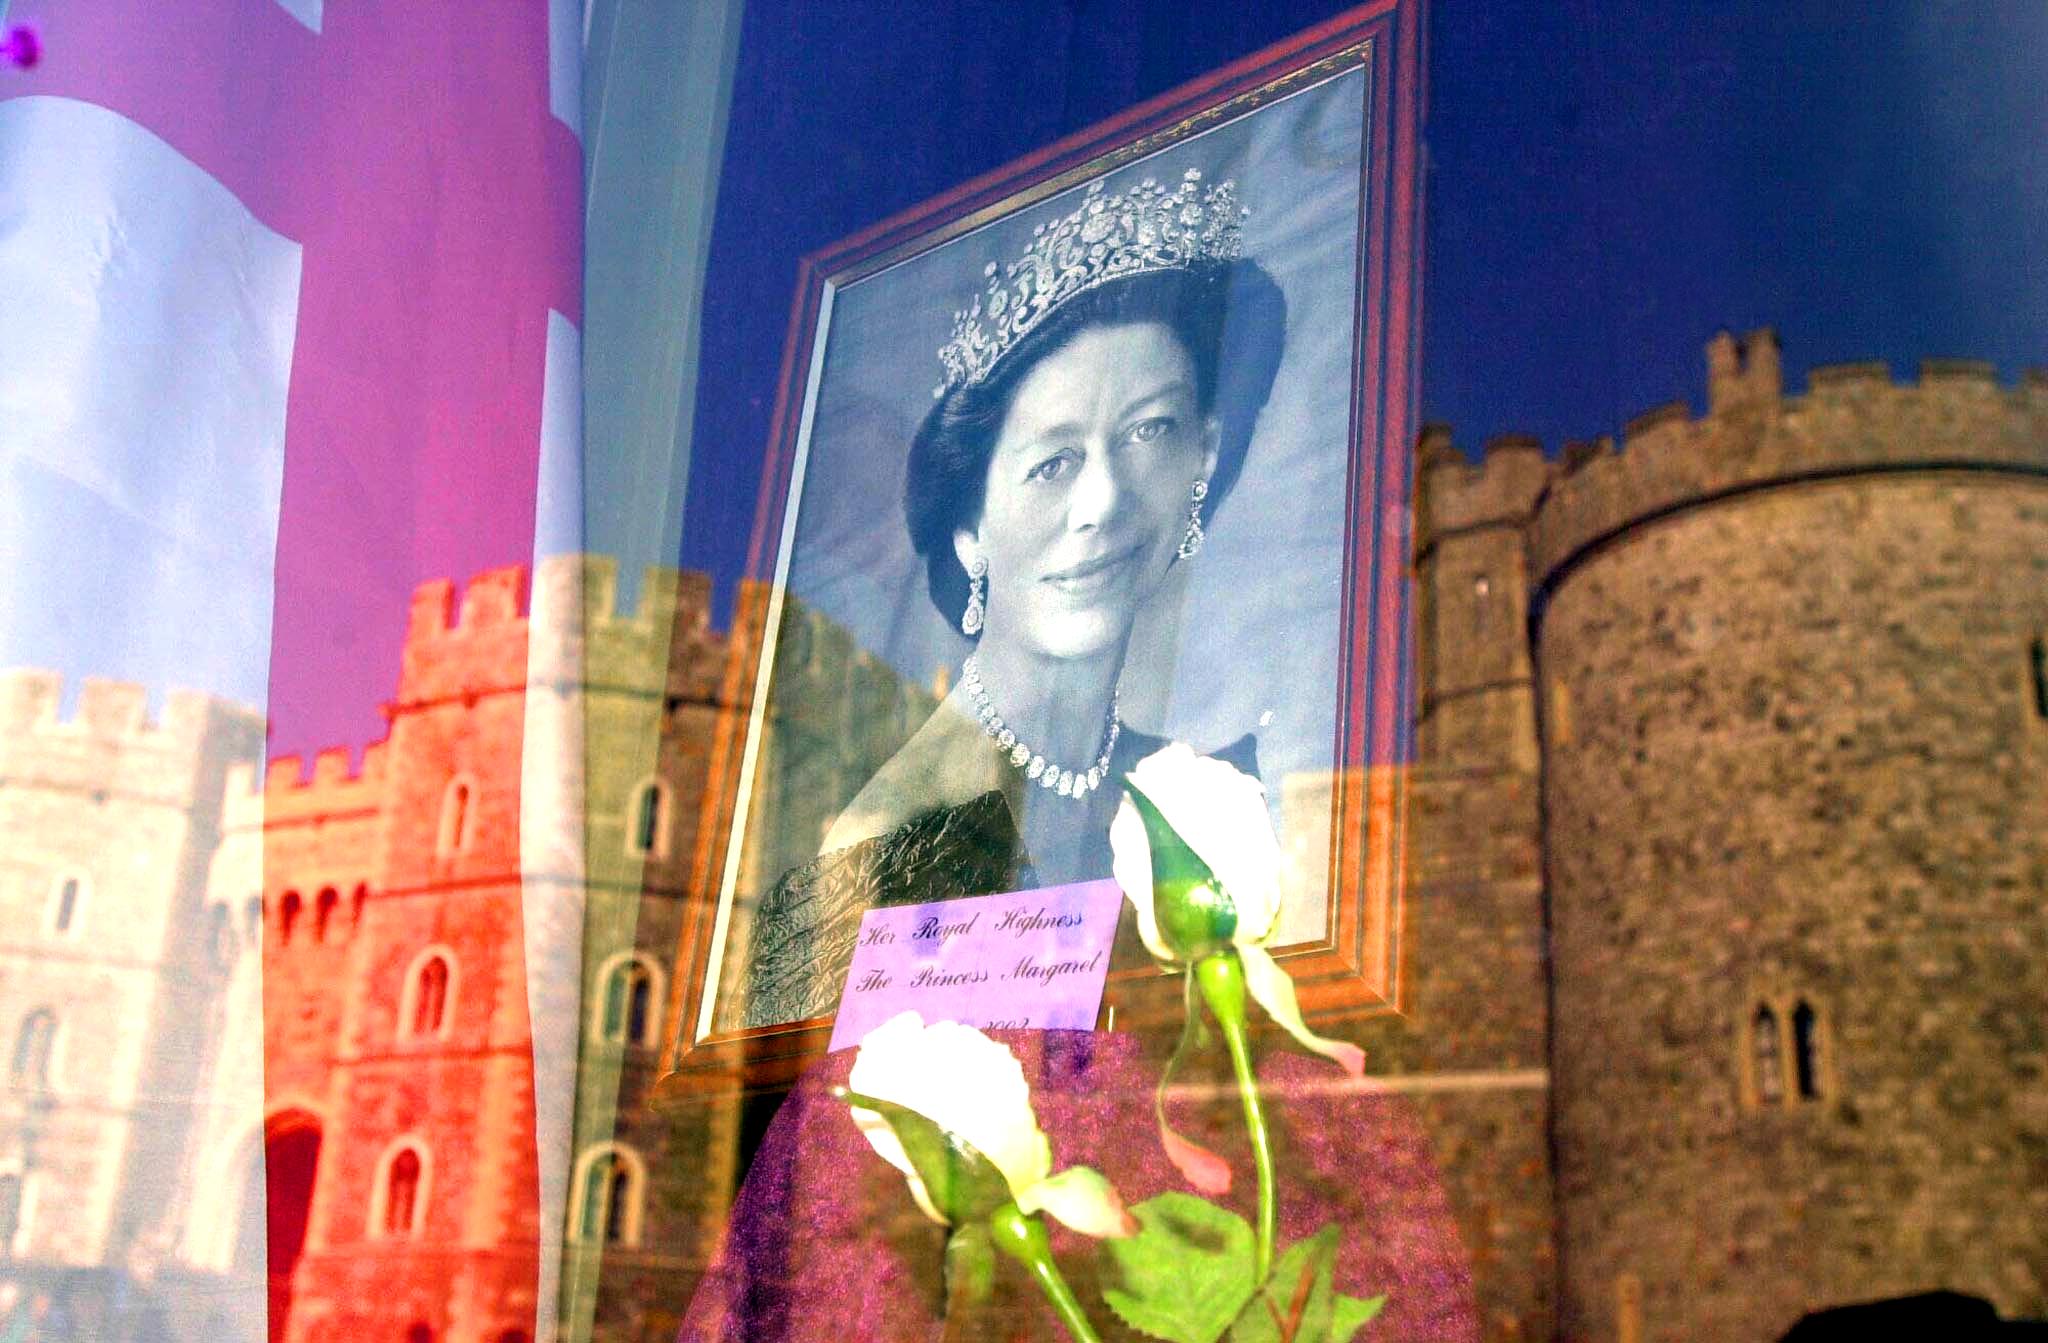 <p><span>A portrait of Princess Margaret hung in a gift shop behind a reflection of Windsor Castle, where her funeral service was held on Feb. 15, 2002. Margaret died at 71 on Feb. 9 -- three days after the 50th anniversary of her father's death -- at King Edward VII's Hospital in London following a stroke.</span></p>